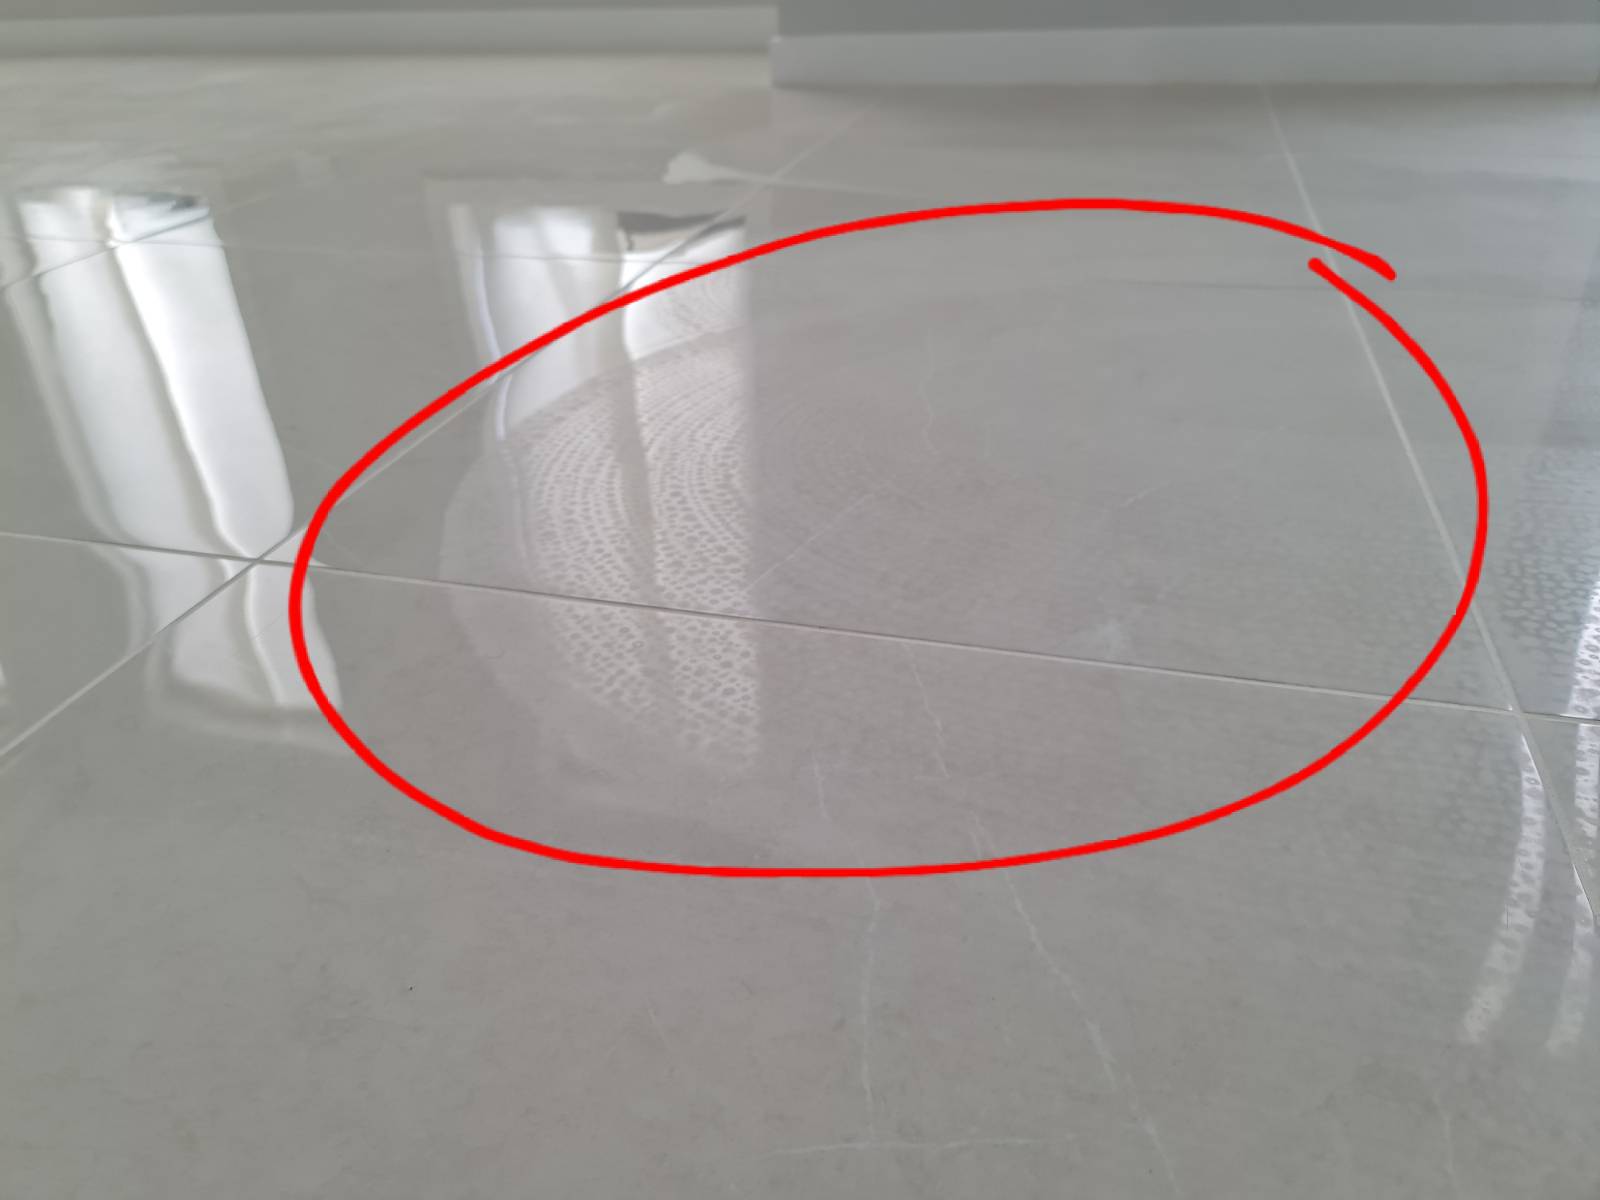 Newly laid gloss tiles that lost its shine